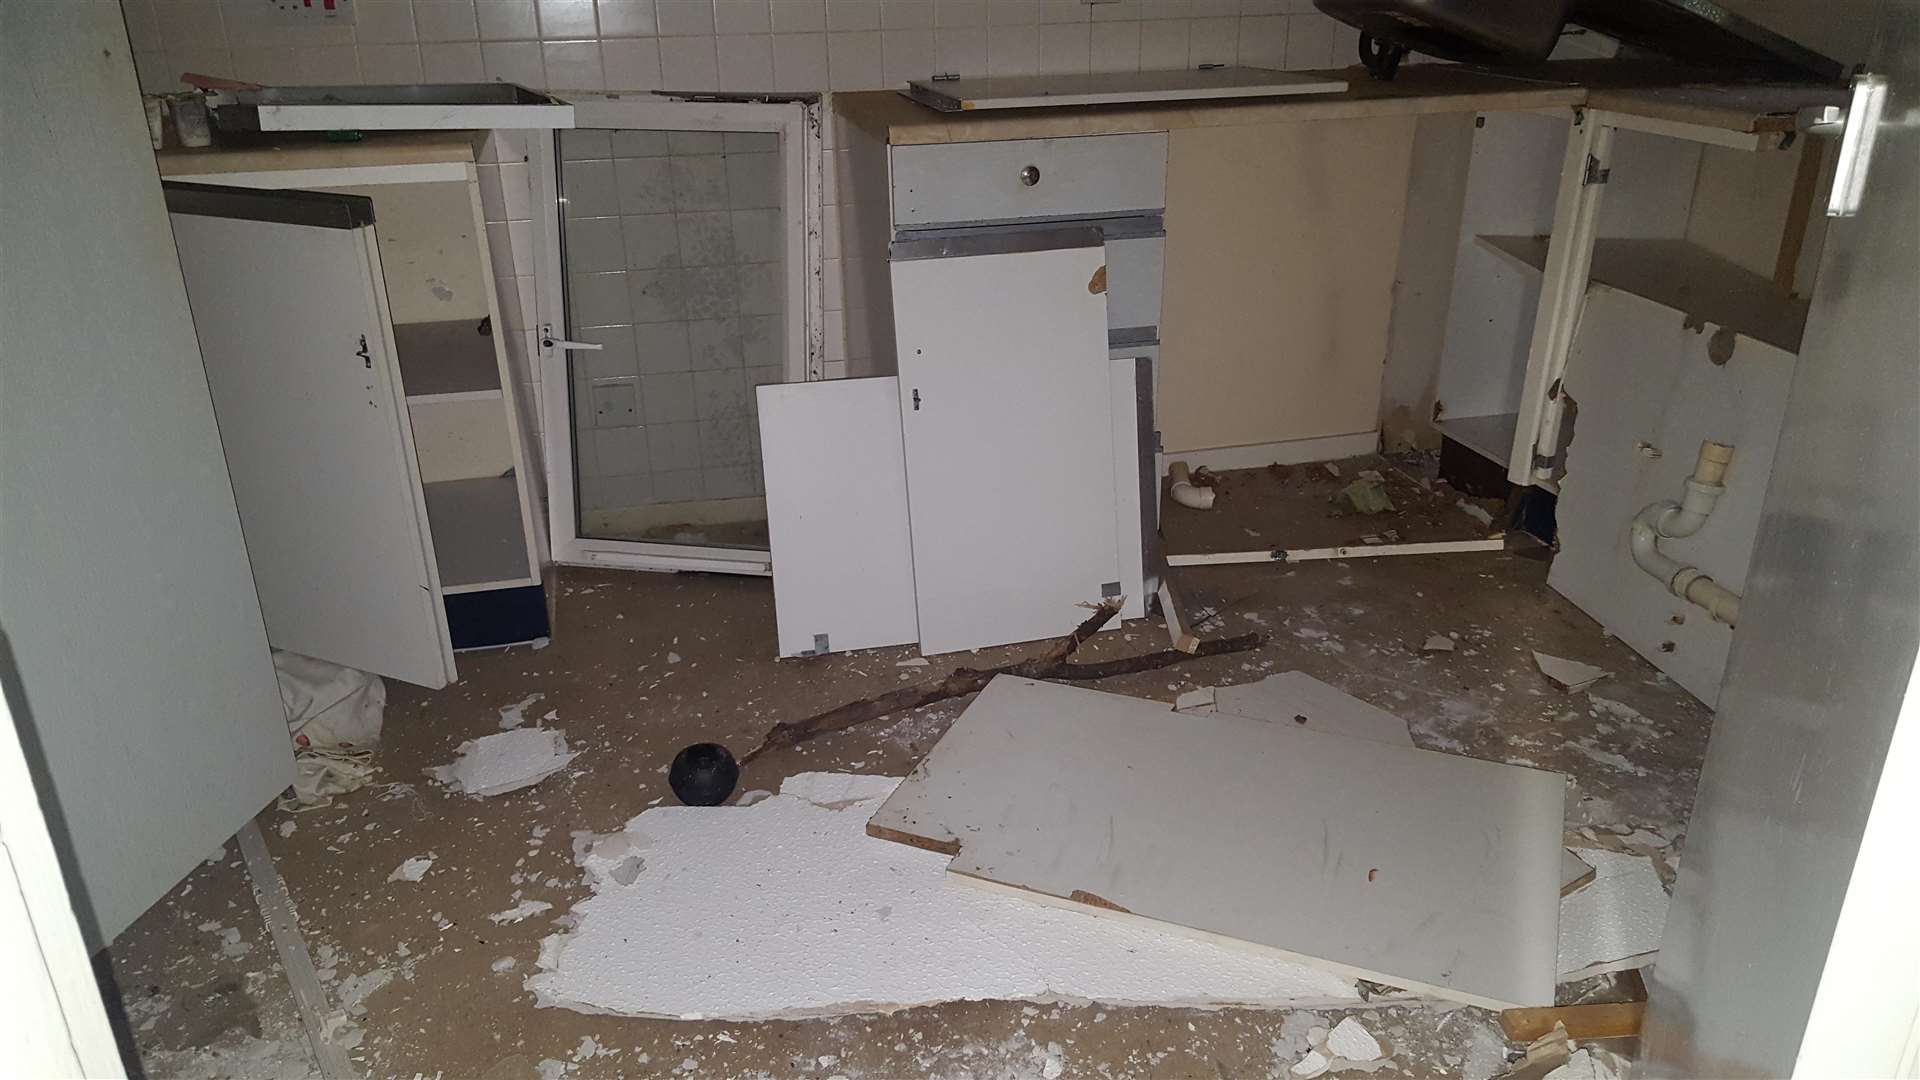 The trashed kitchen in one house